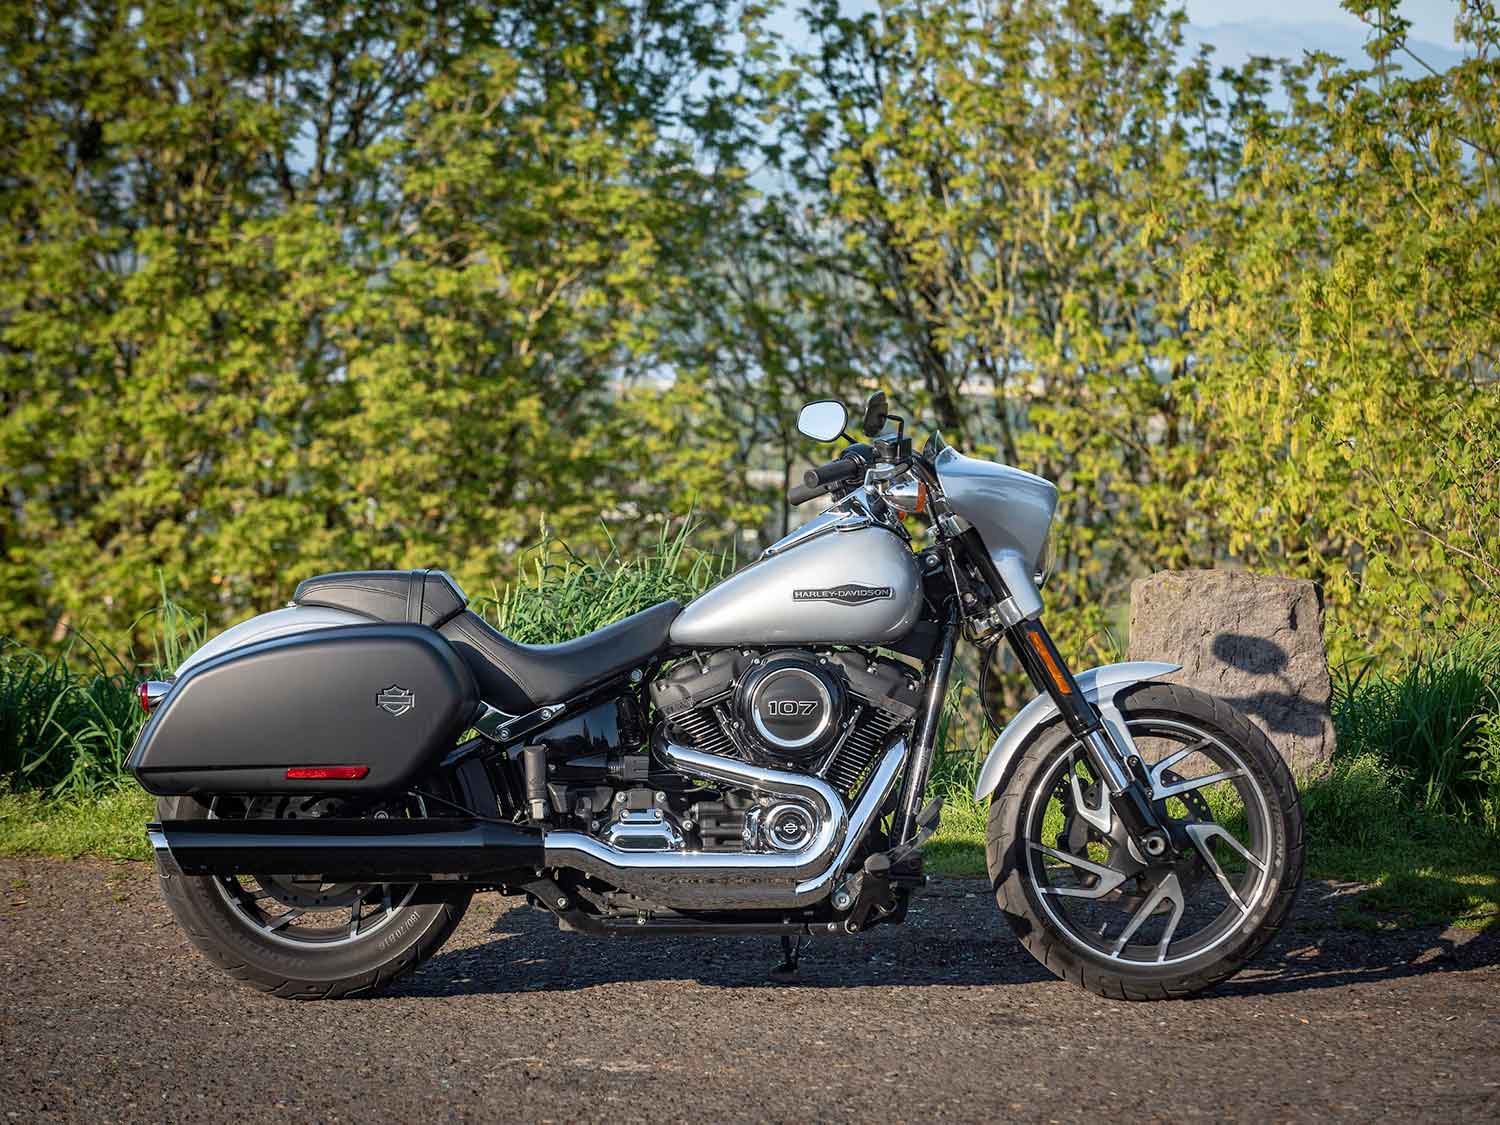 1 000 Miles On A 2019 Harley Davidson Sport Glide And We Re Not Done Yet Motorcycle Cruiser